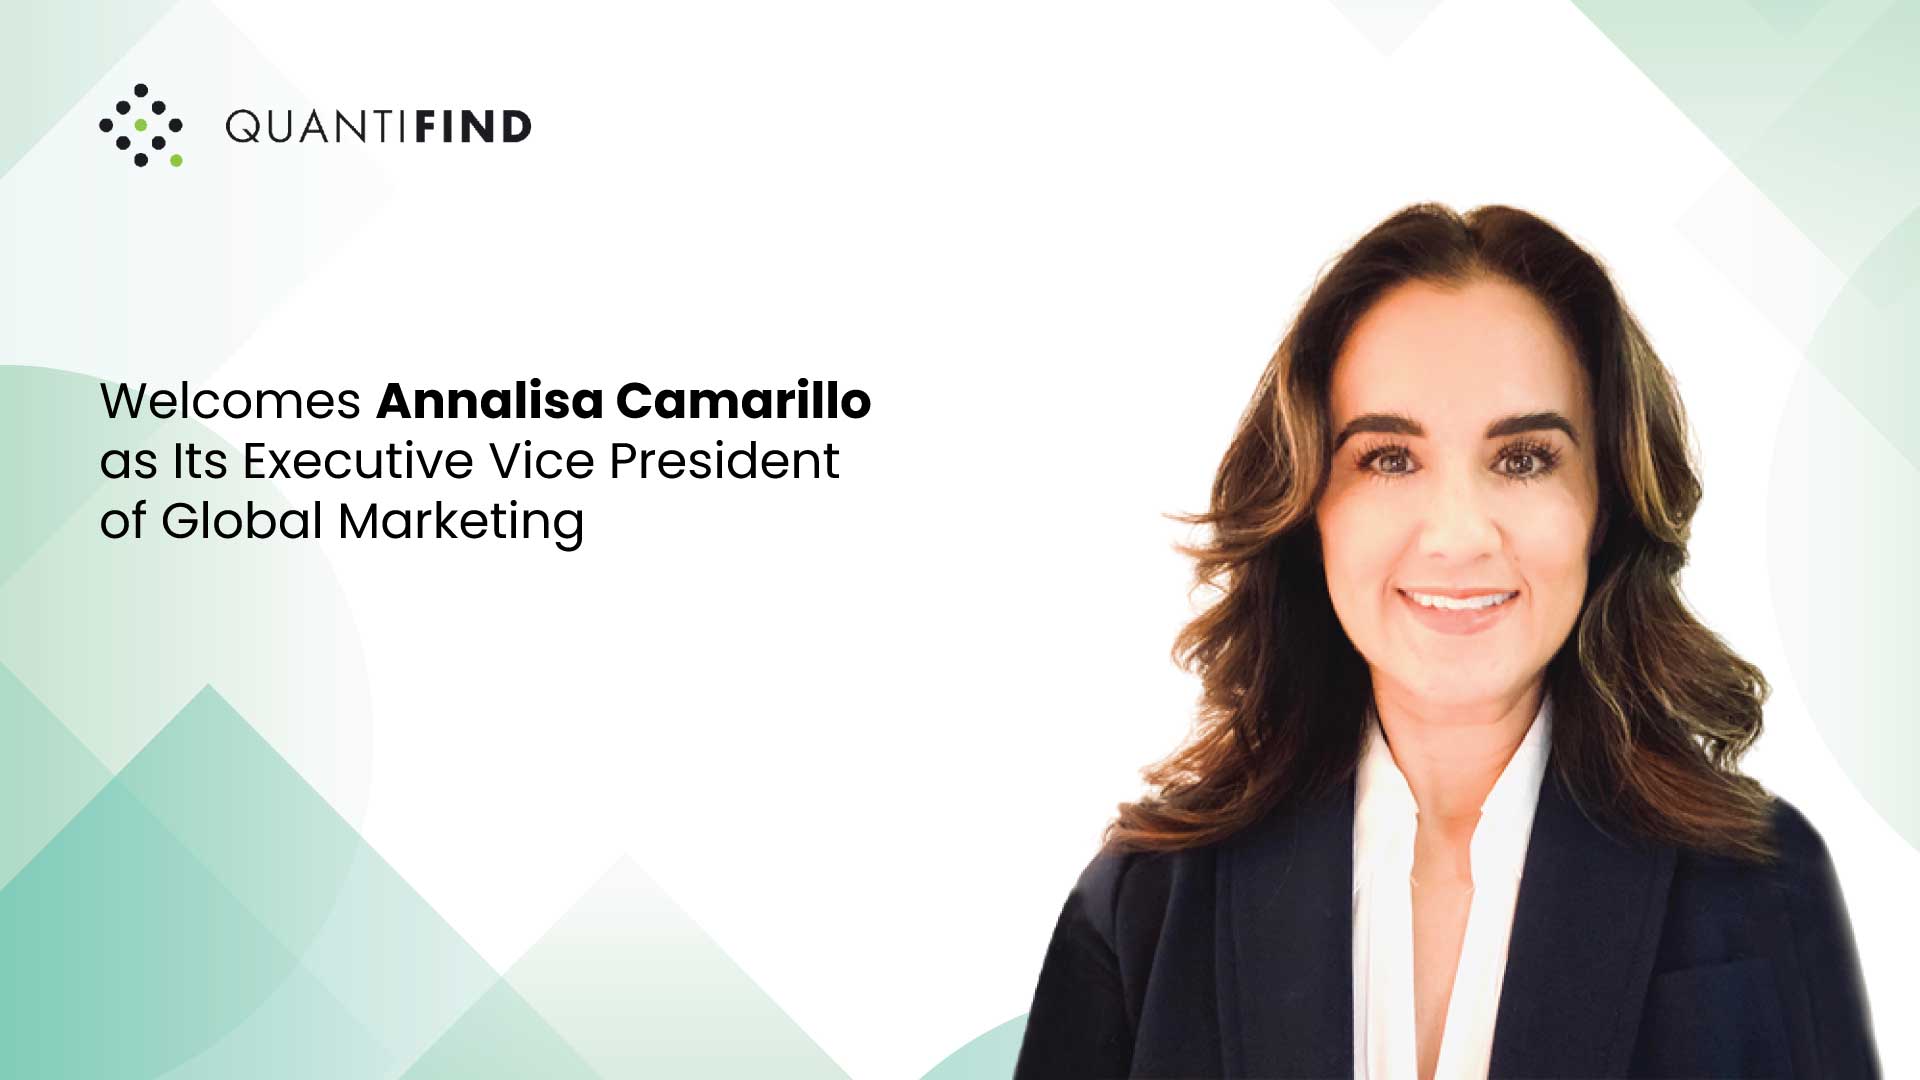 Quantifind Welcomes Annalisa Camarillo as Its Executive Vice President of Global Marketing